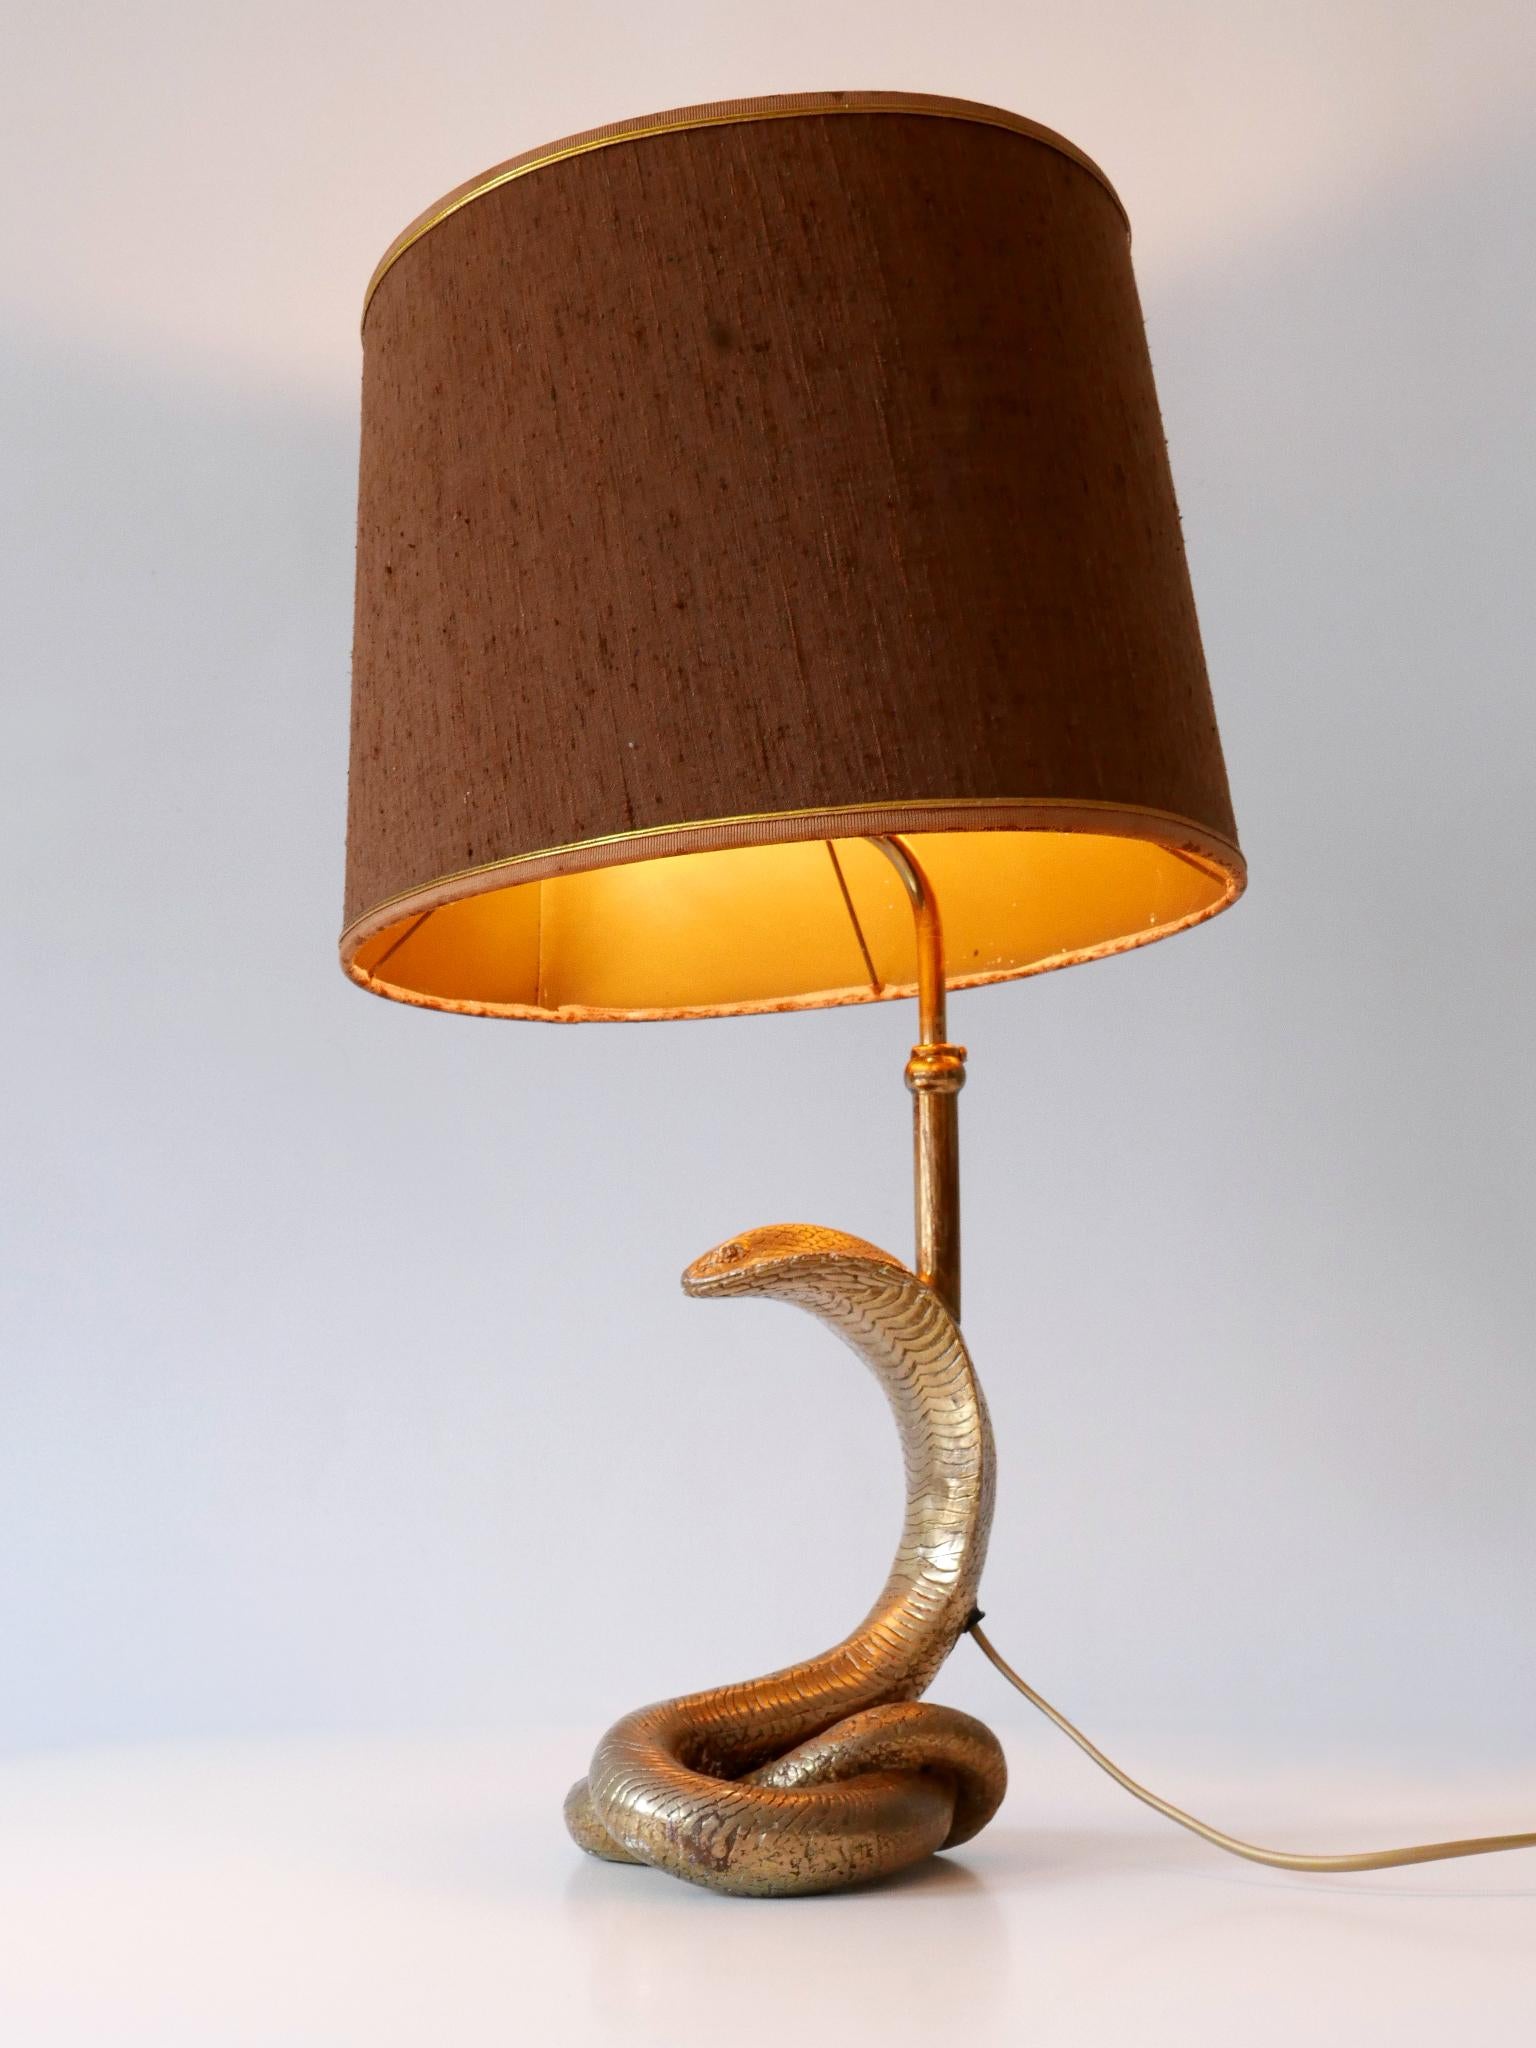 Exceptional Mid-Century Modern Cobra Table Lamp by Maison Jansen France 1970s For Sale 4